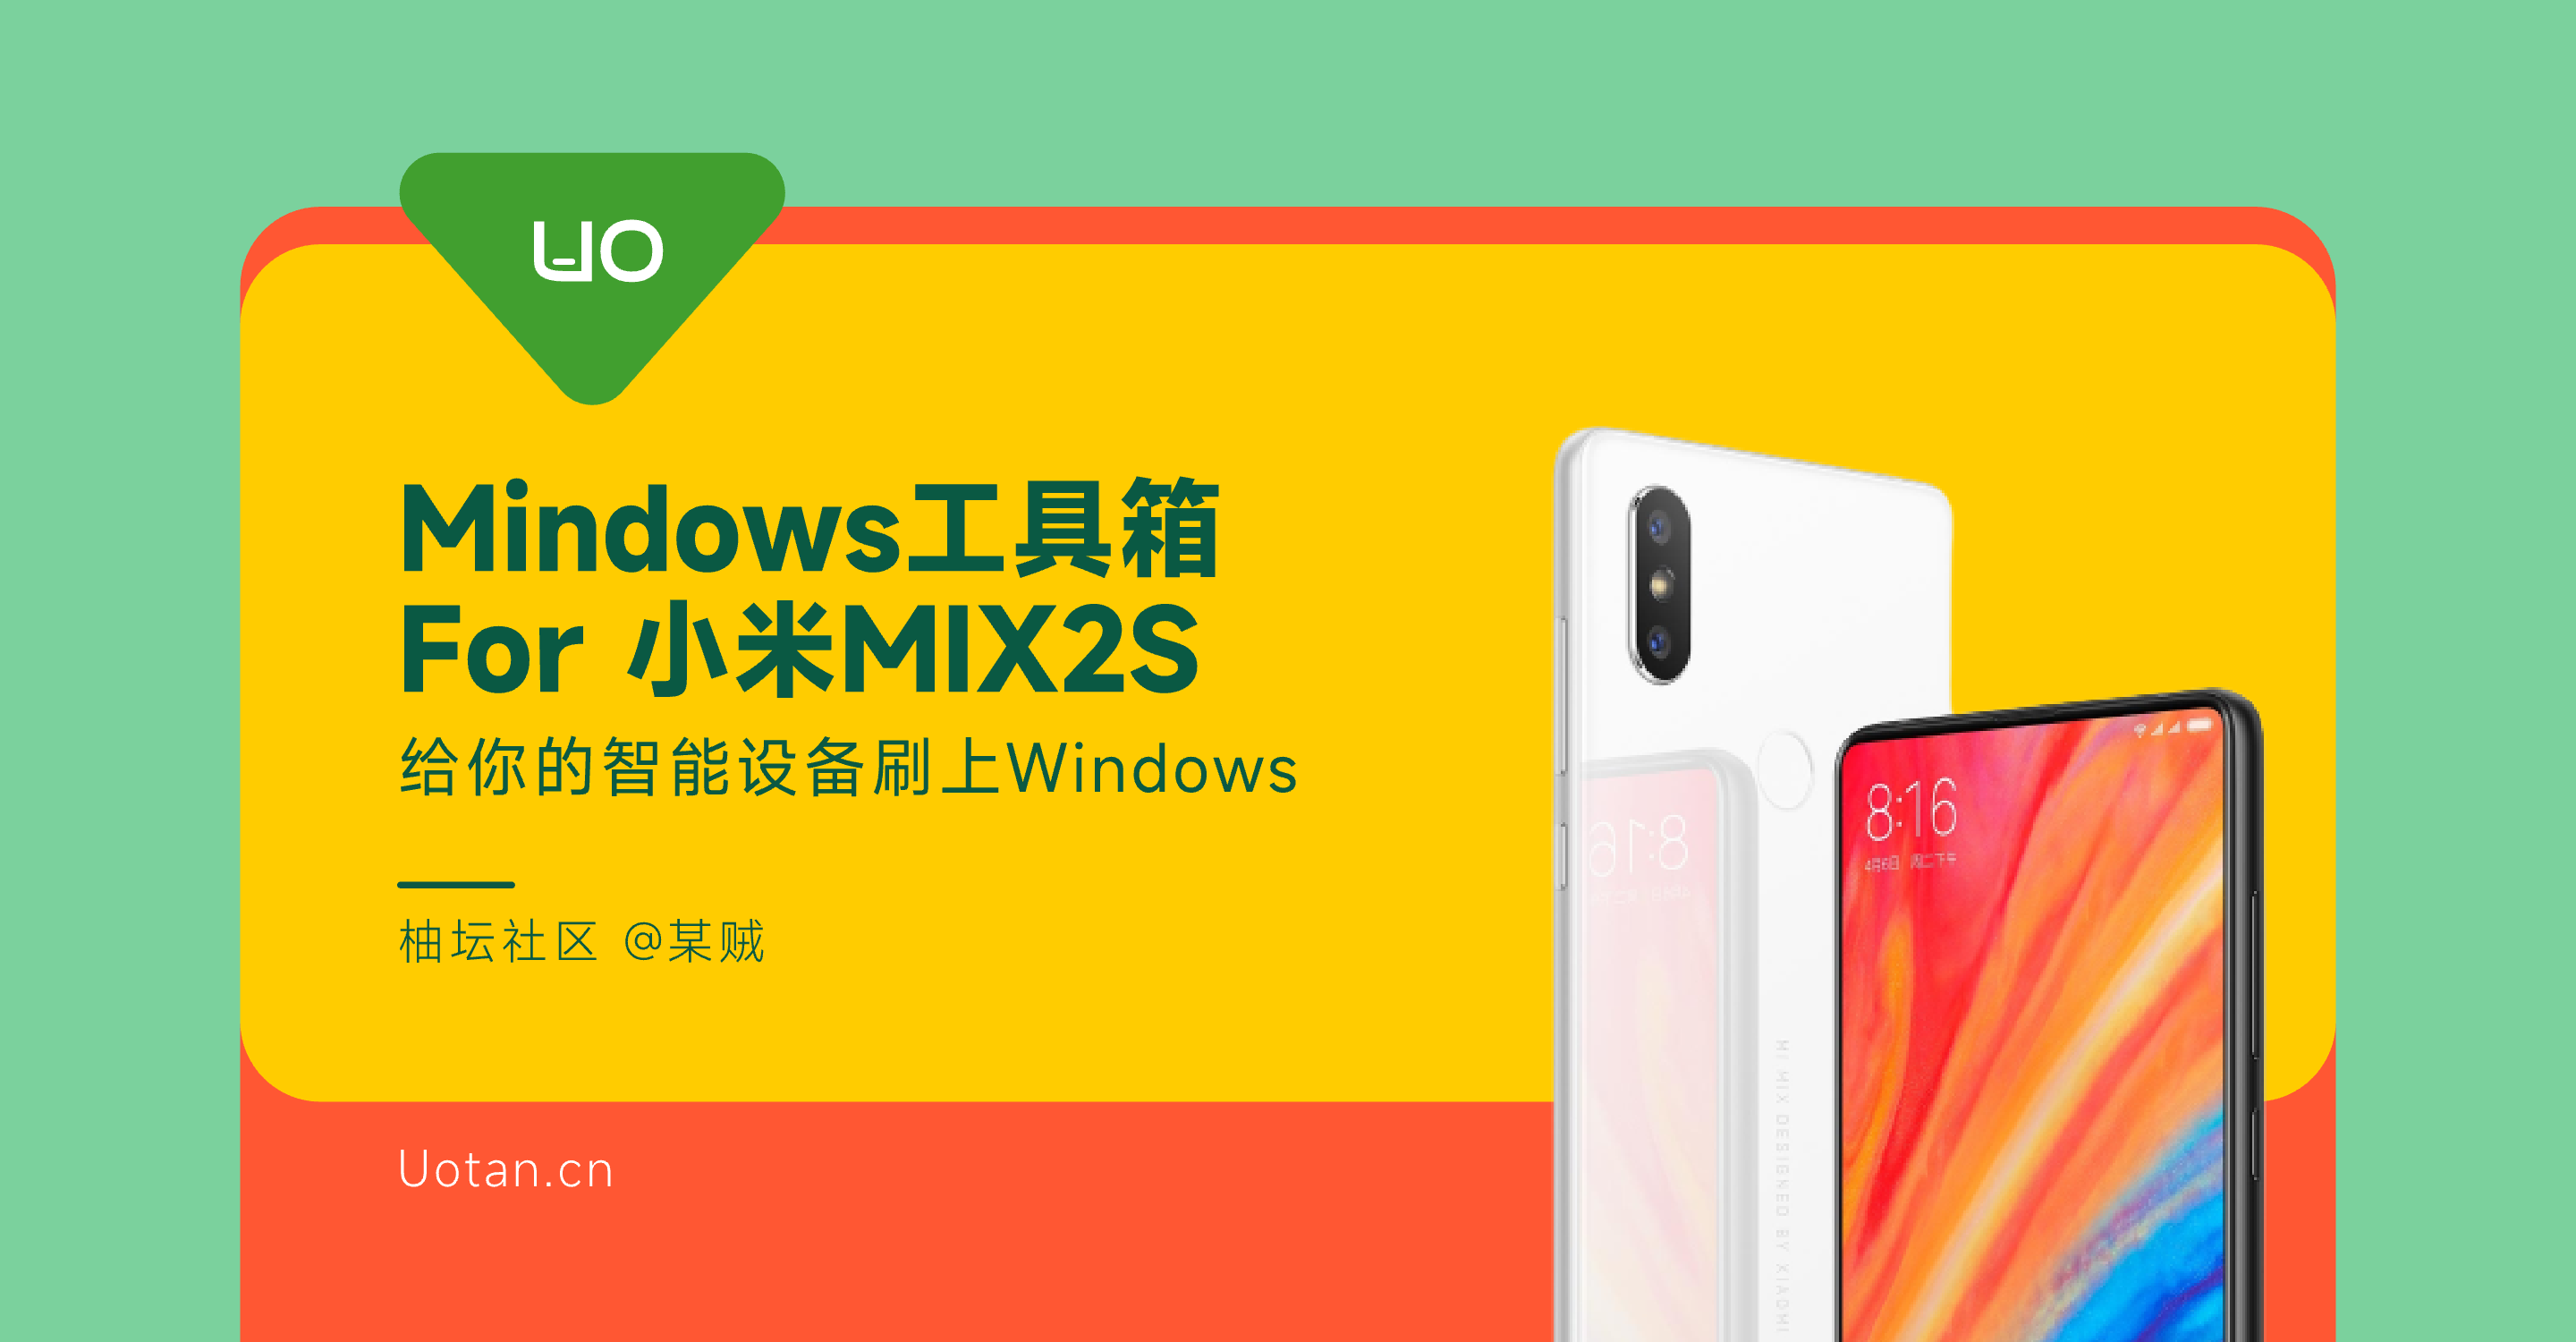 Mindows工具箱 For 小米MIX2S (1).png